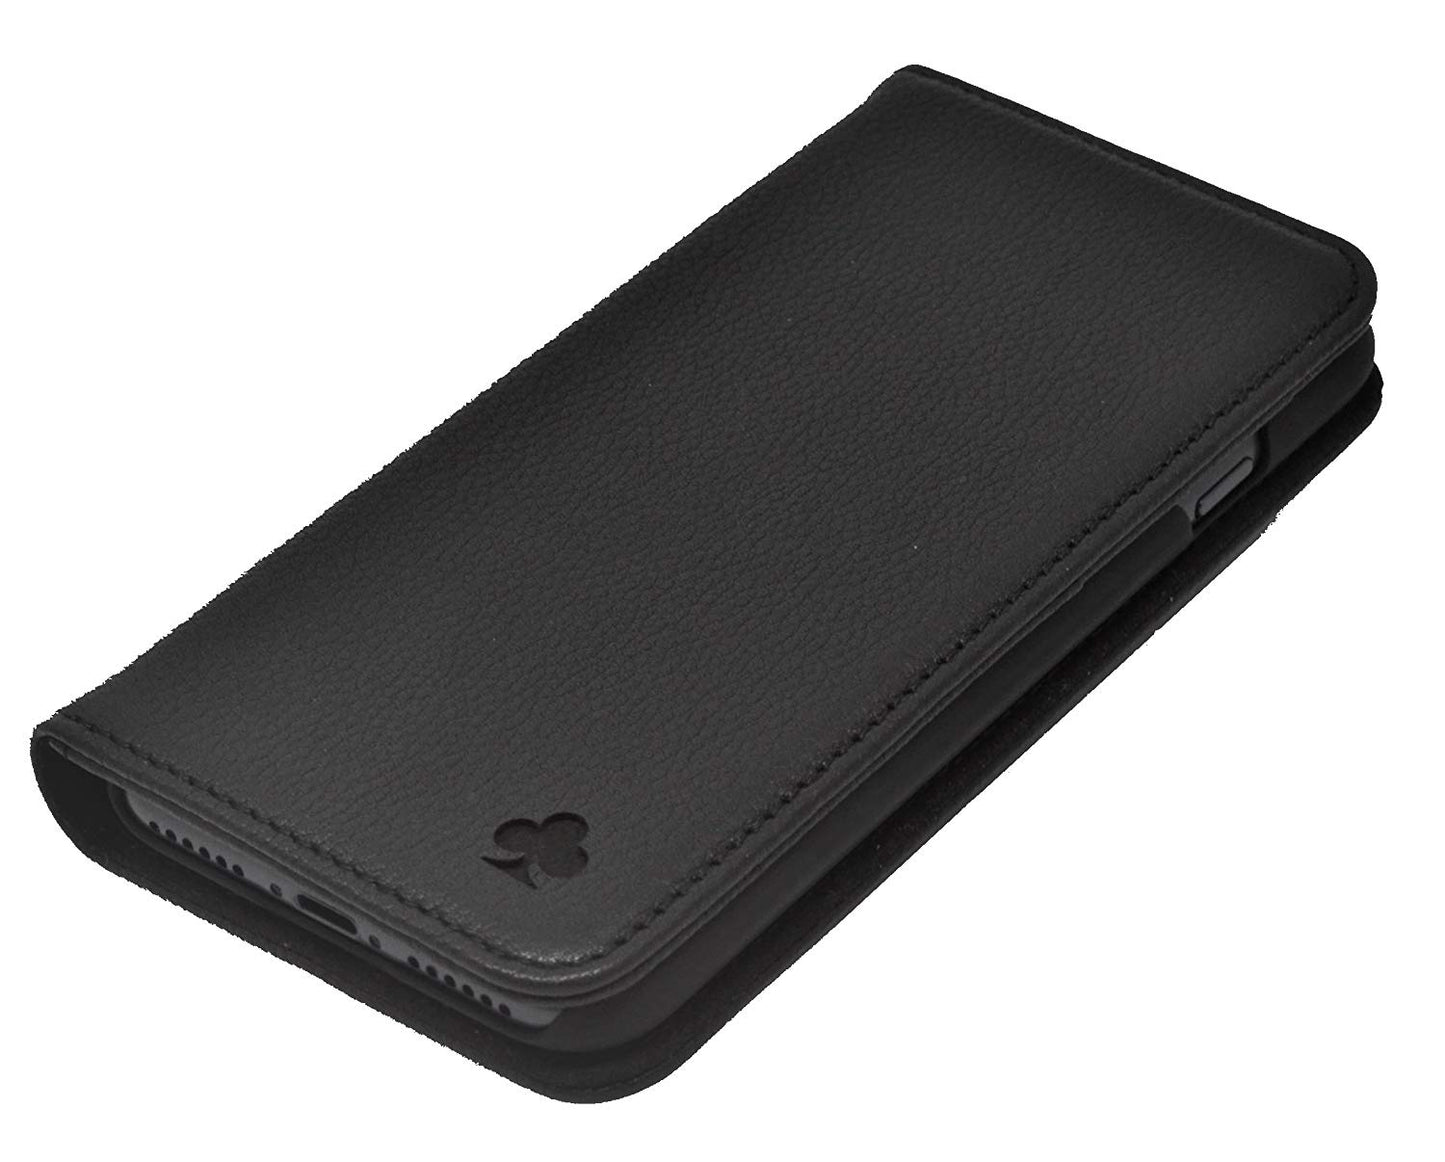 iPhone 11 Pro Max Leather Case. Premium Slim Genuine Leather Stand Case/Cover/Wallet (Pure Black)